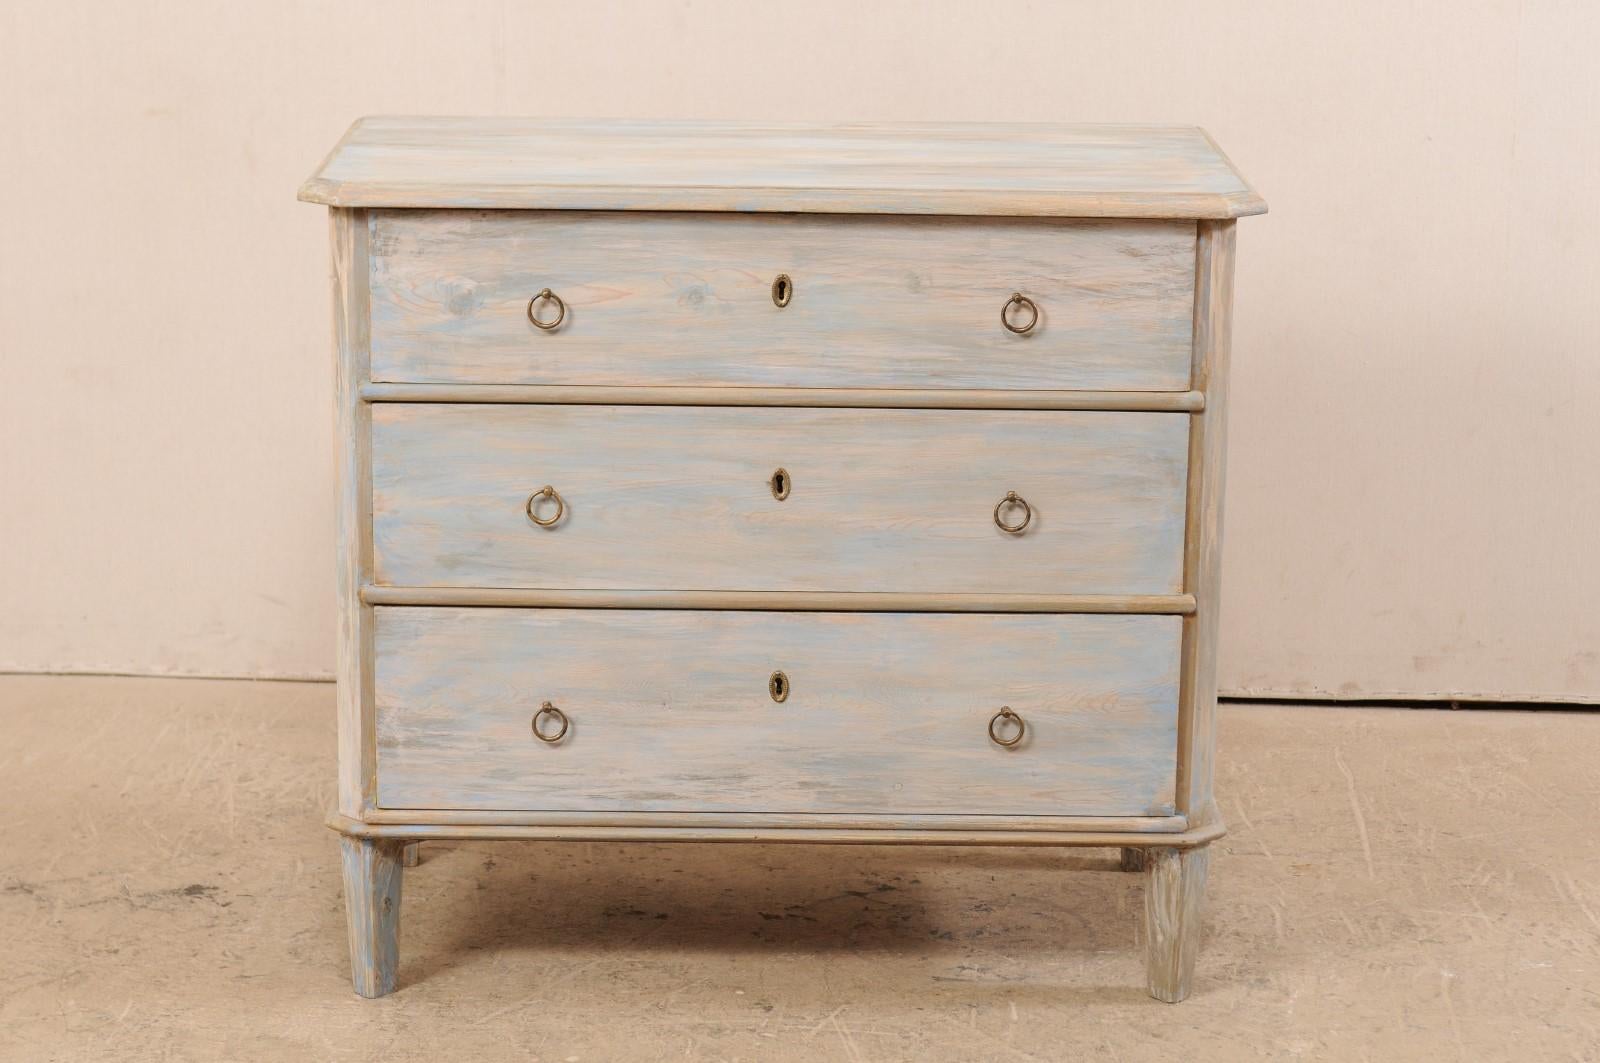 A Swedish painted wood three drawer chest from the mid-19th century. This antique chest from Sweden has been designed in typical Gustavian style, featuring a simple, clean design with slanted side posts and feet, and each top forward corner